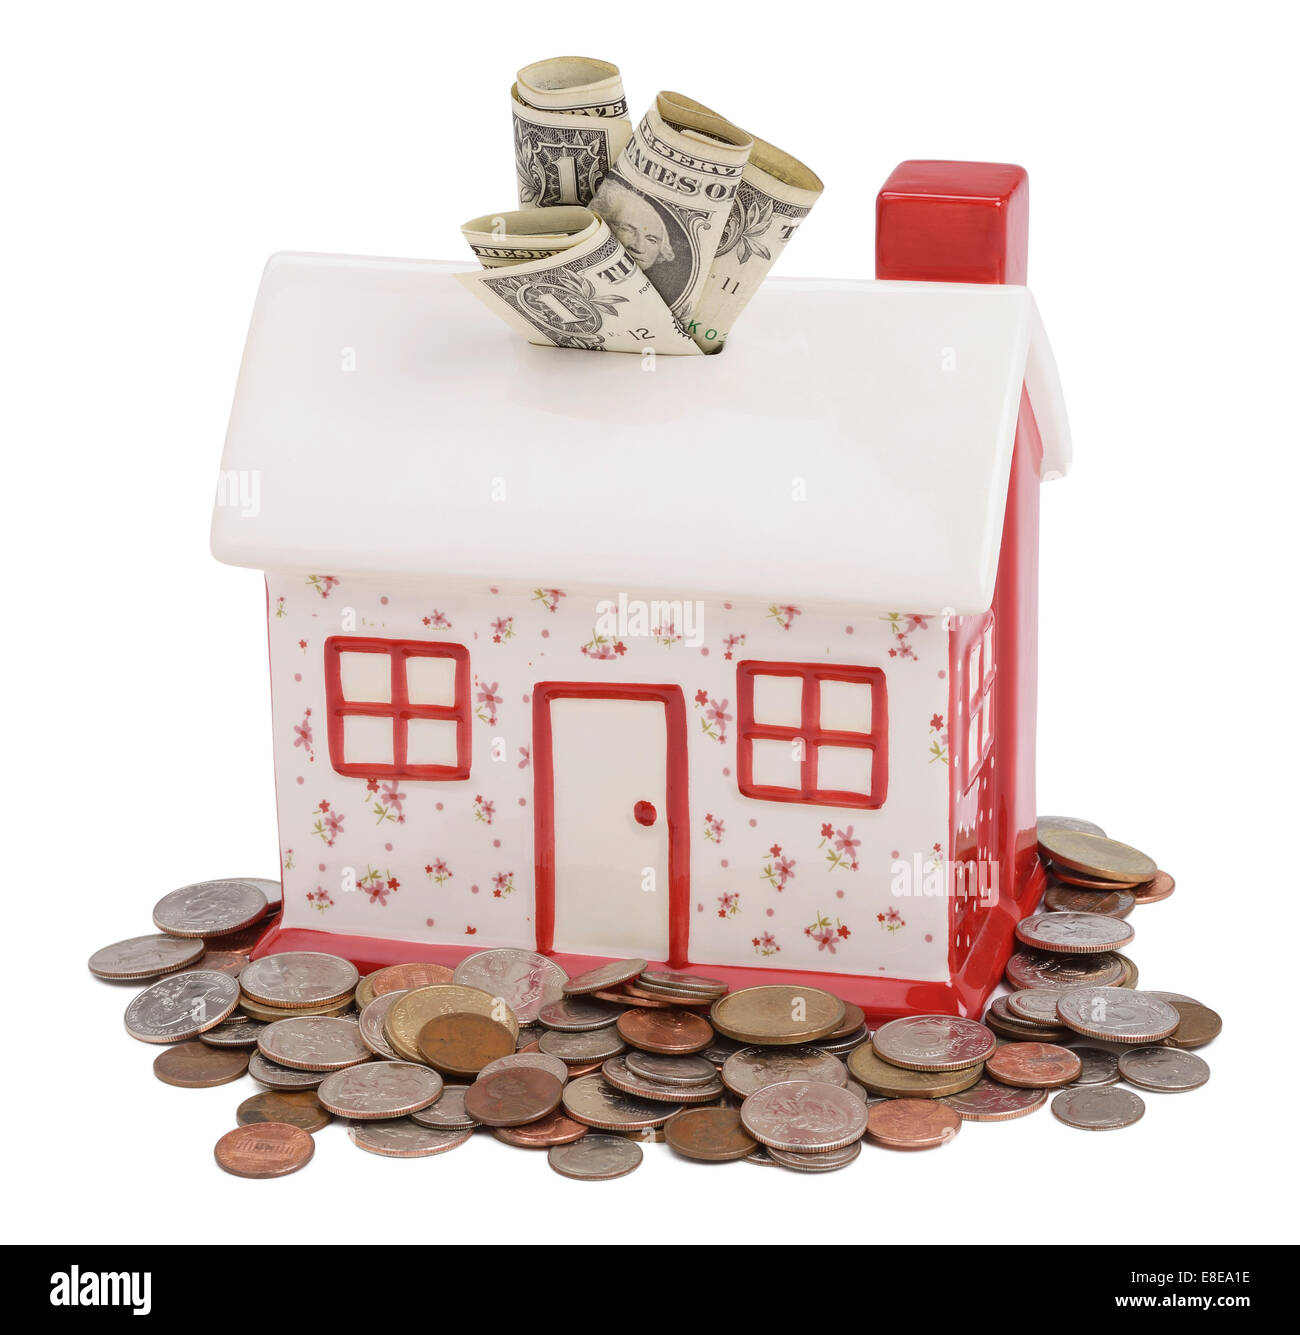 House shaped piggy bank with US dollar coins and notes Stock Photo